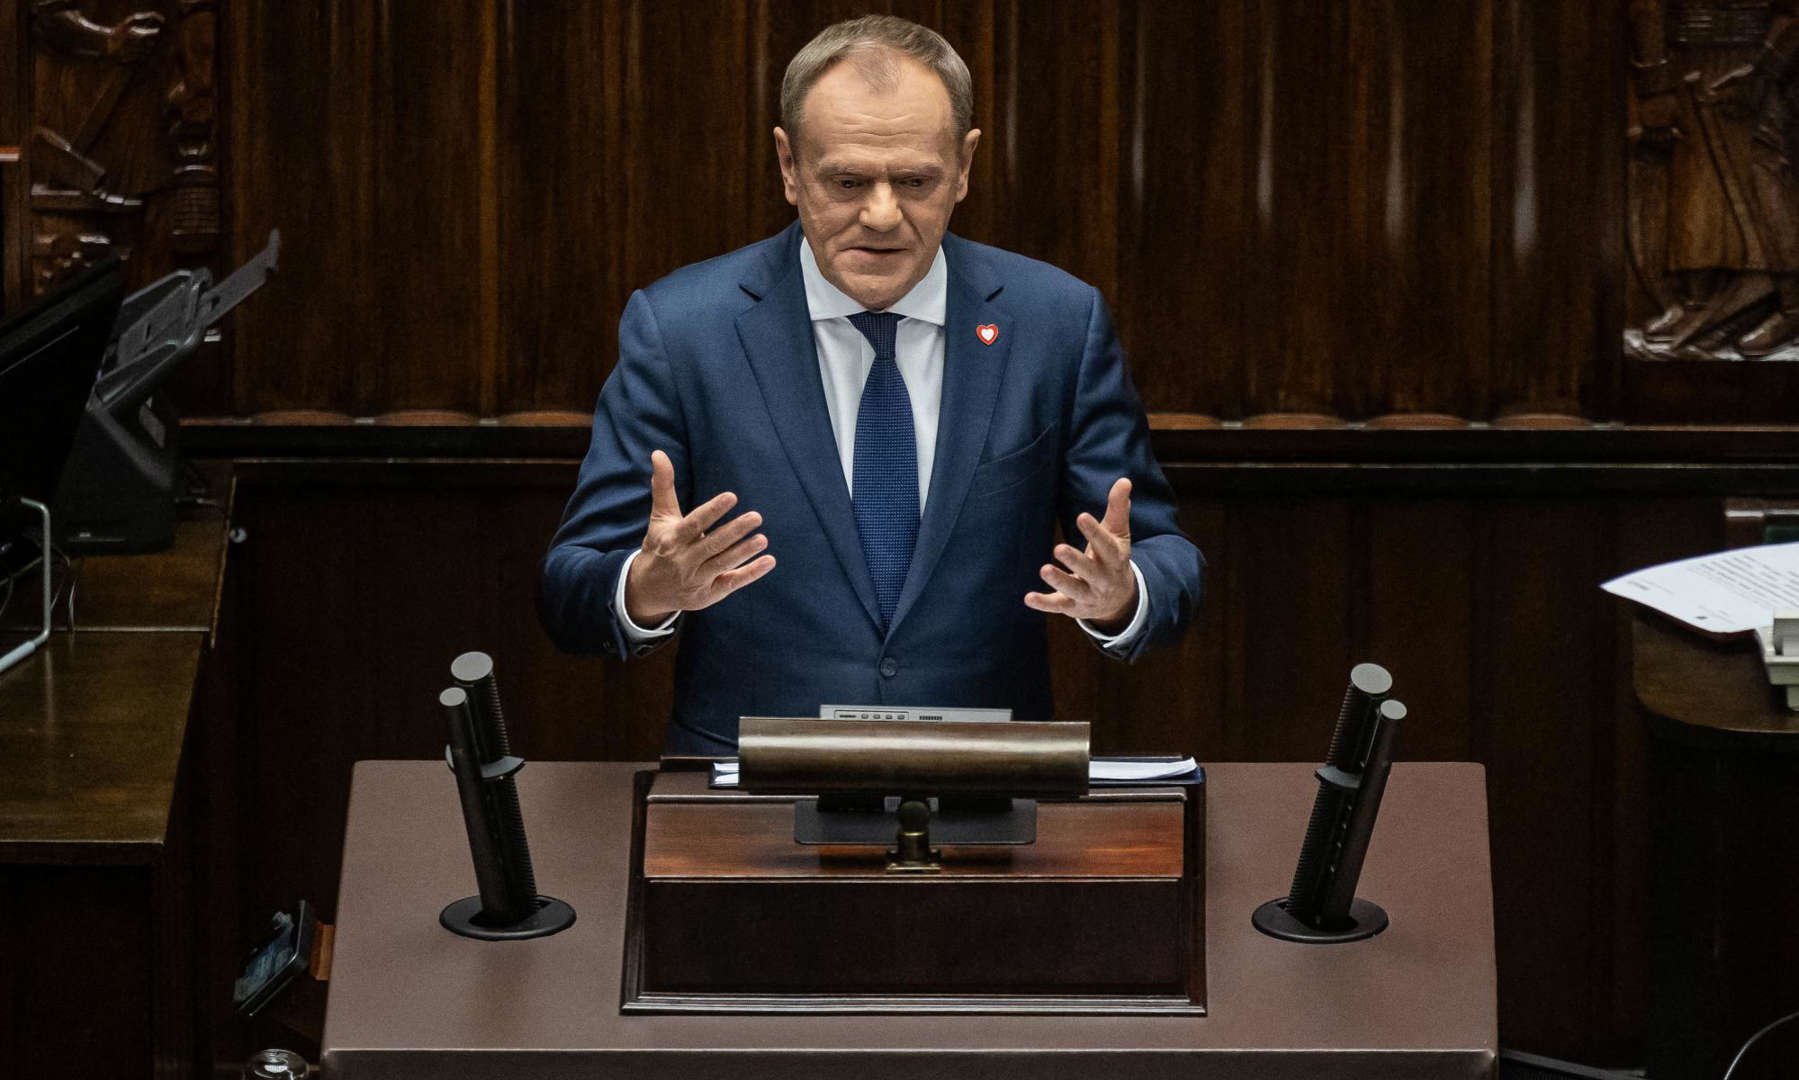 Donald Tusk elected Polish PM by parliament